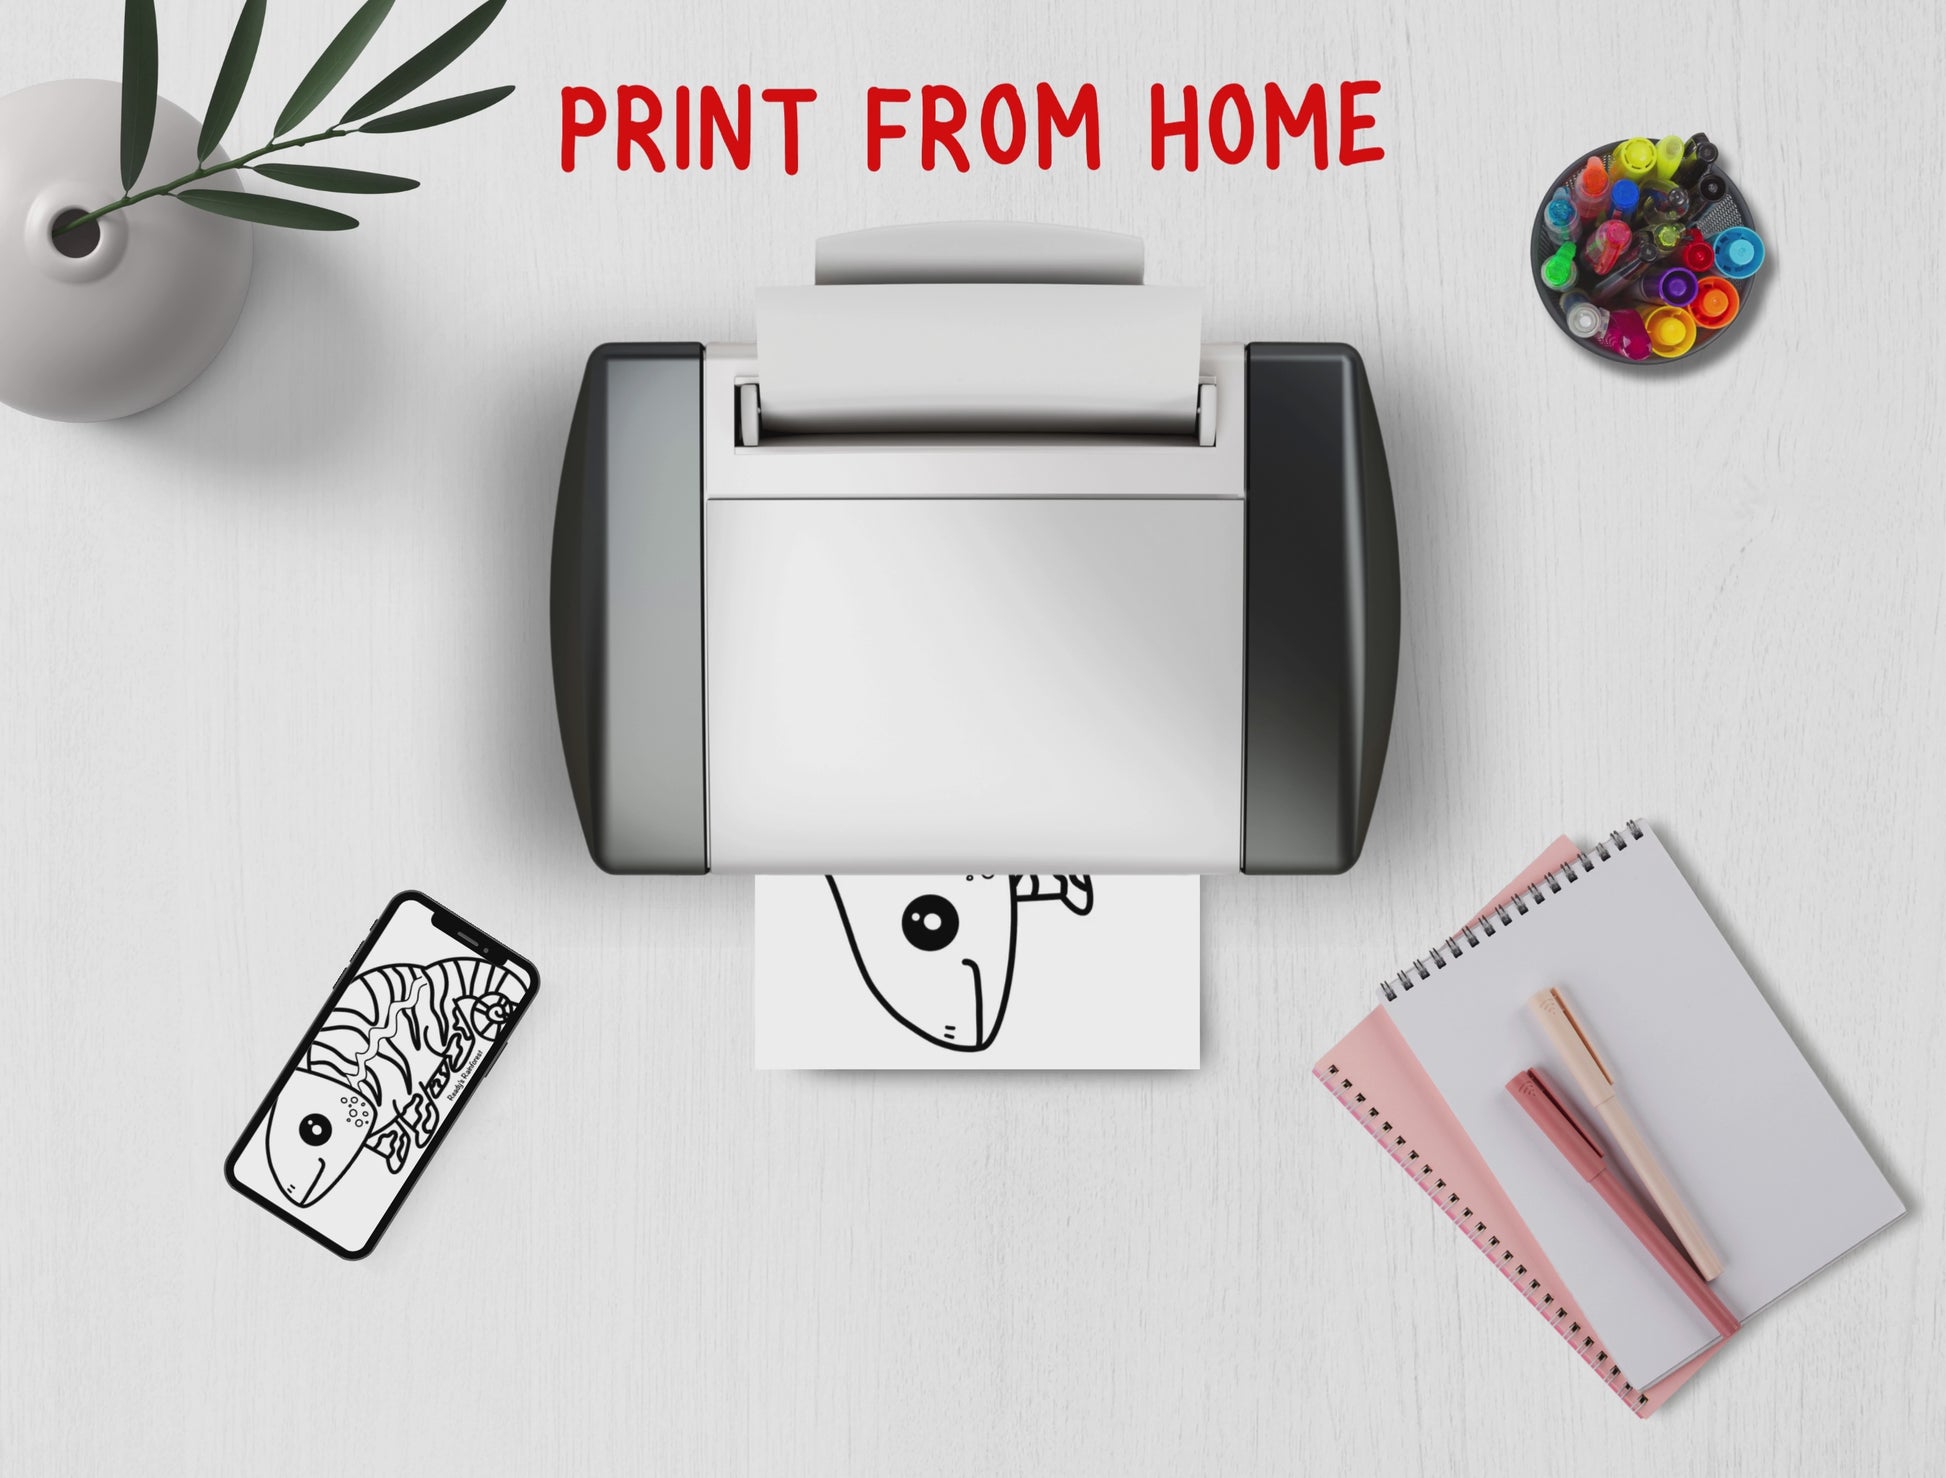 Print at home as many copies as you want, with your favorite paper. For personal use only. 